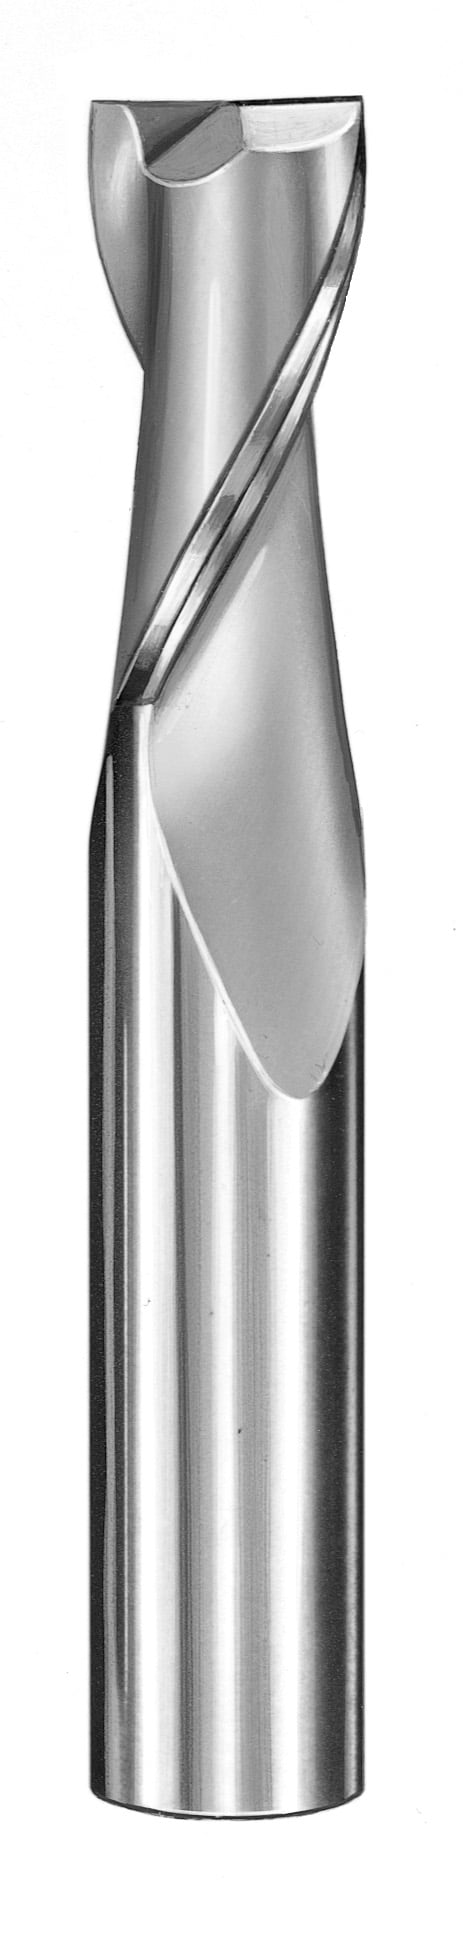 1/16" Dia, 2 Flute, Square End End Mill - 91266